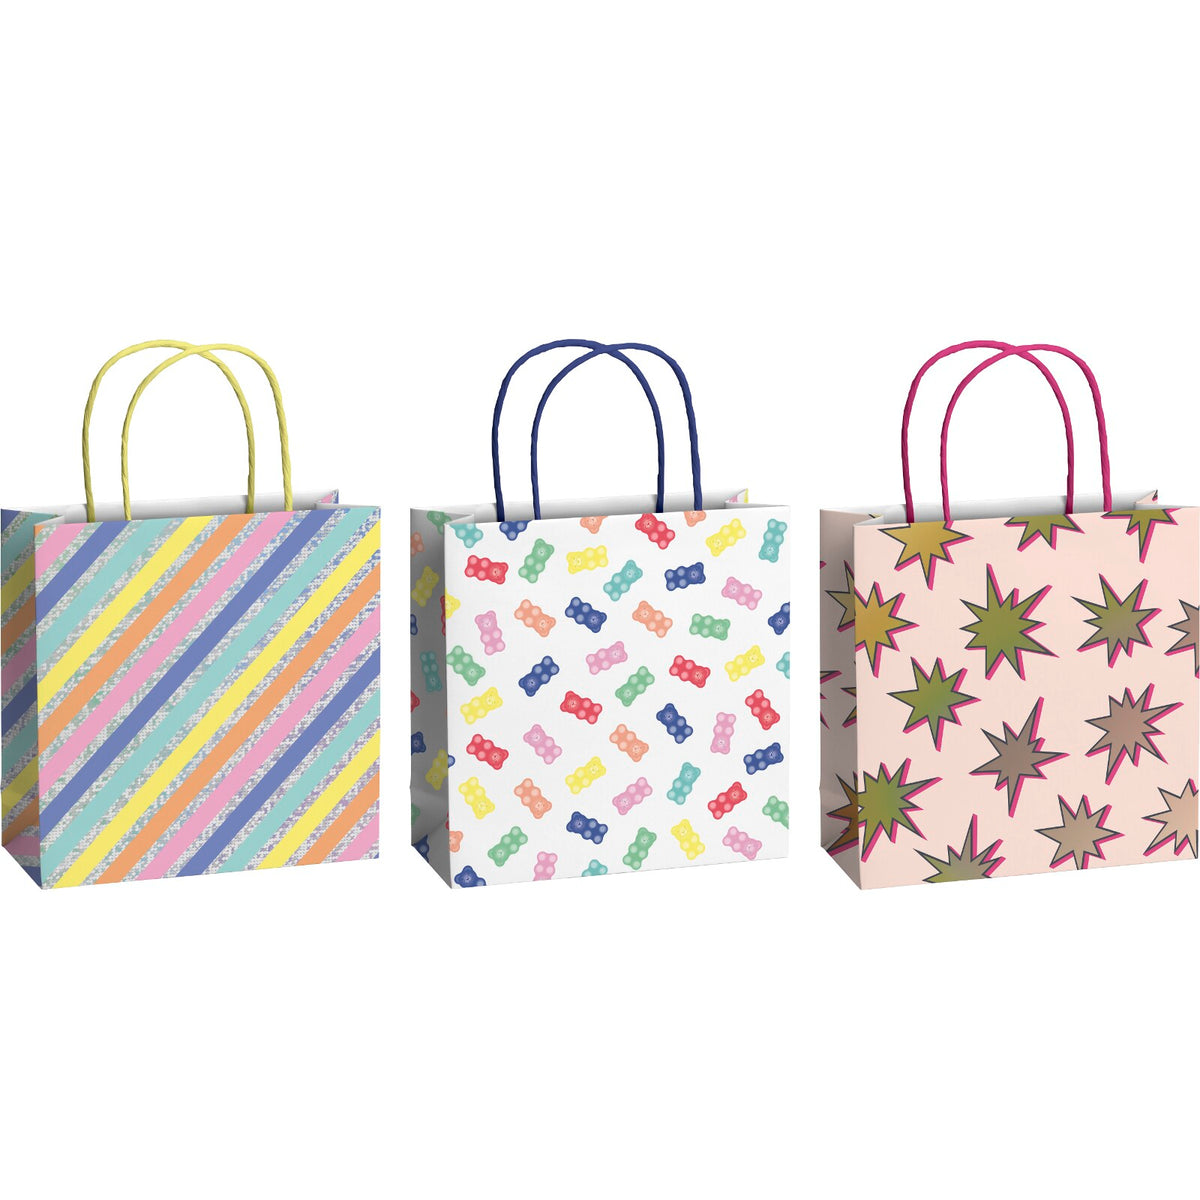 Pan Small Gift Bags 3 Pack from Penny Black